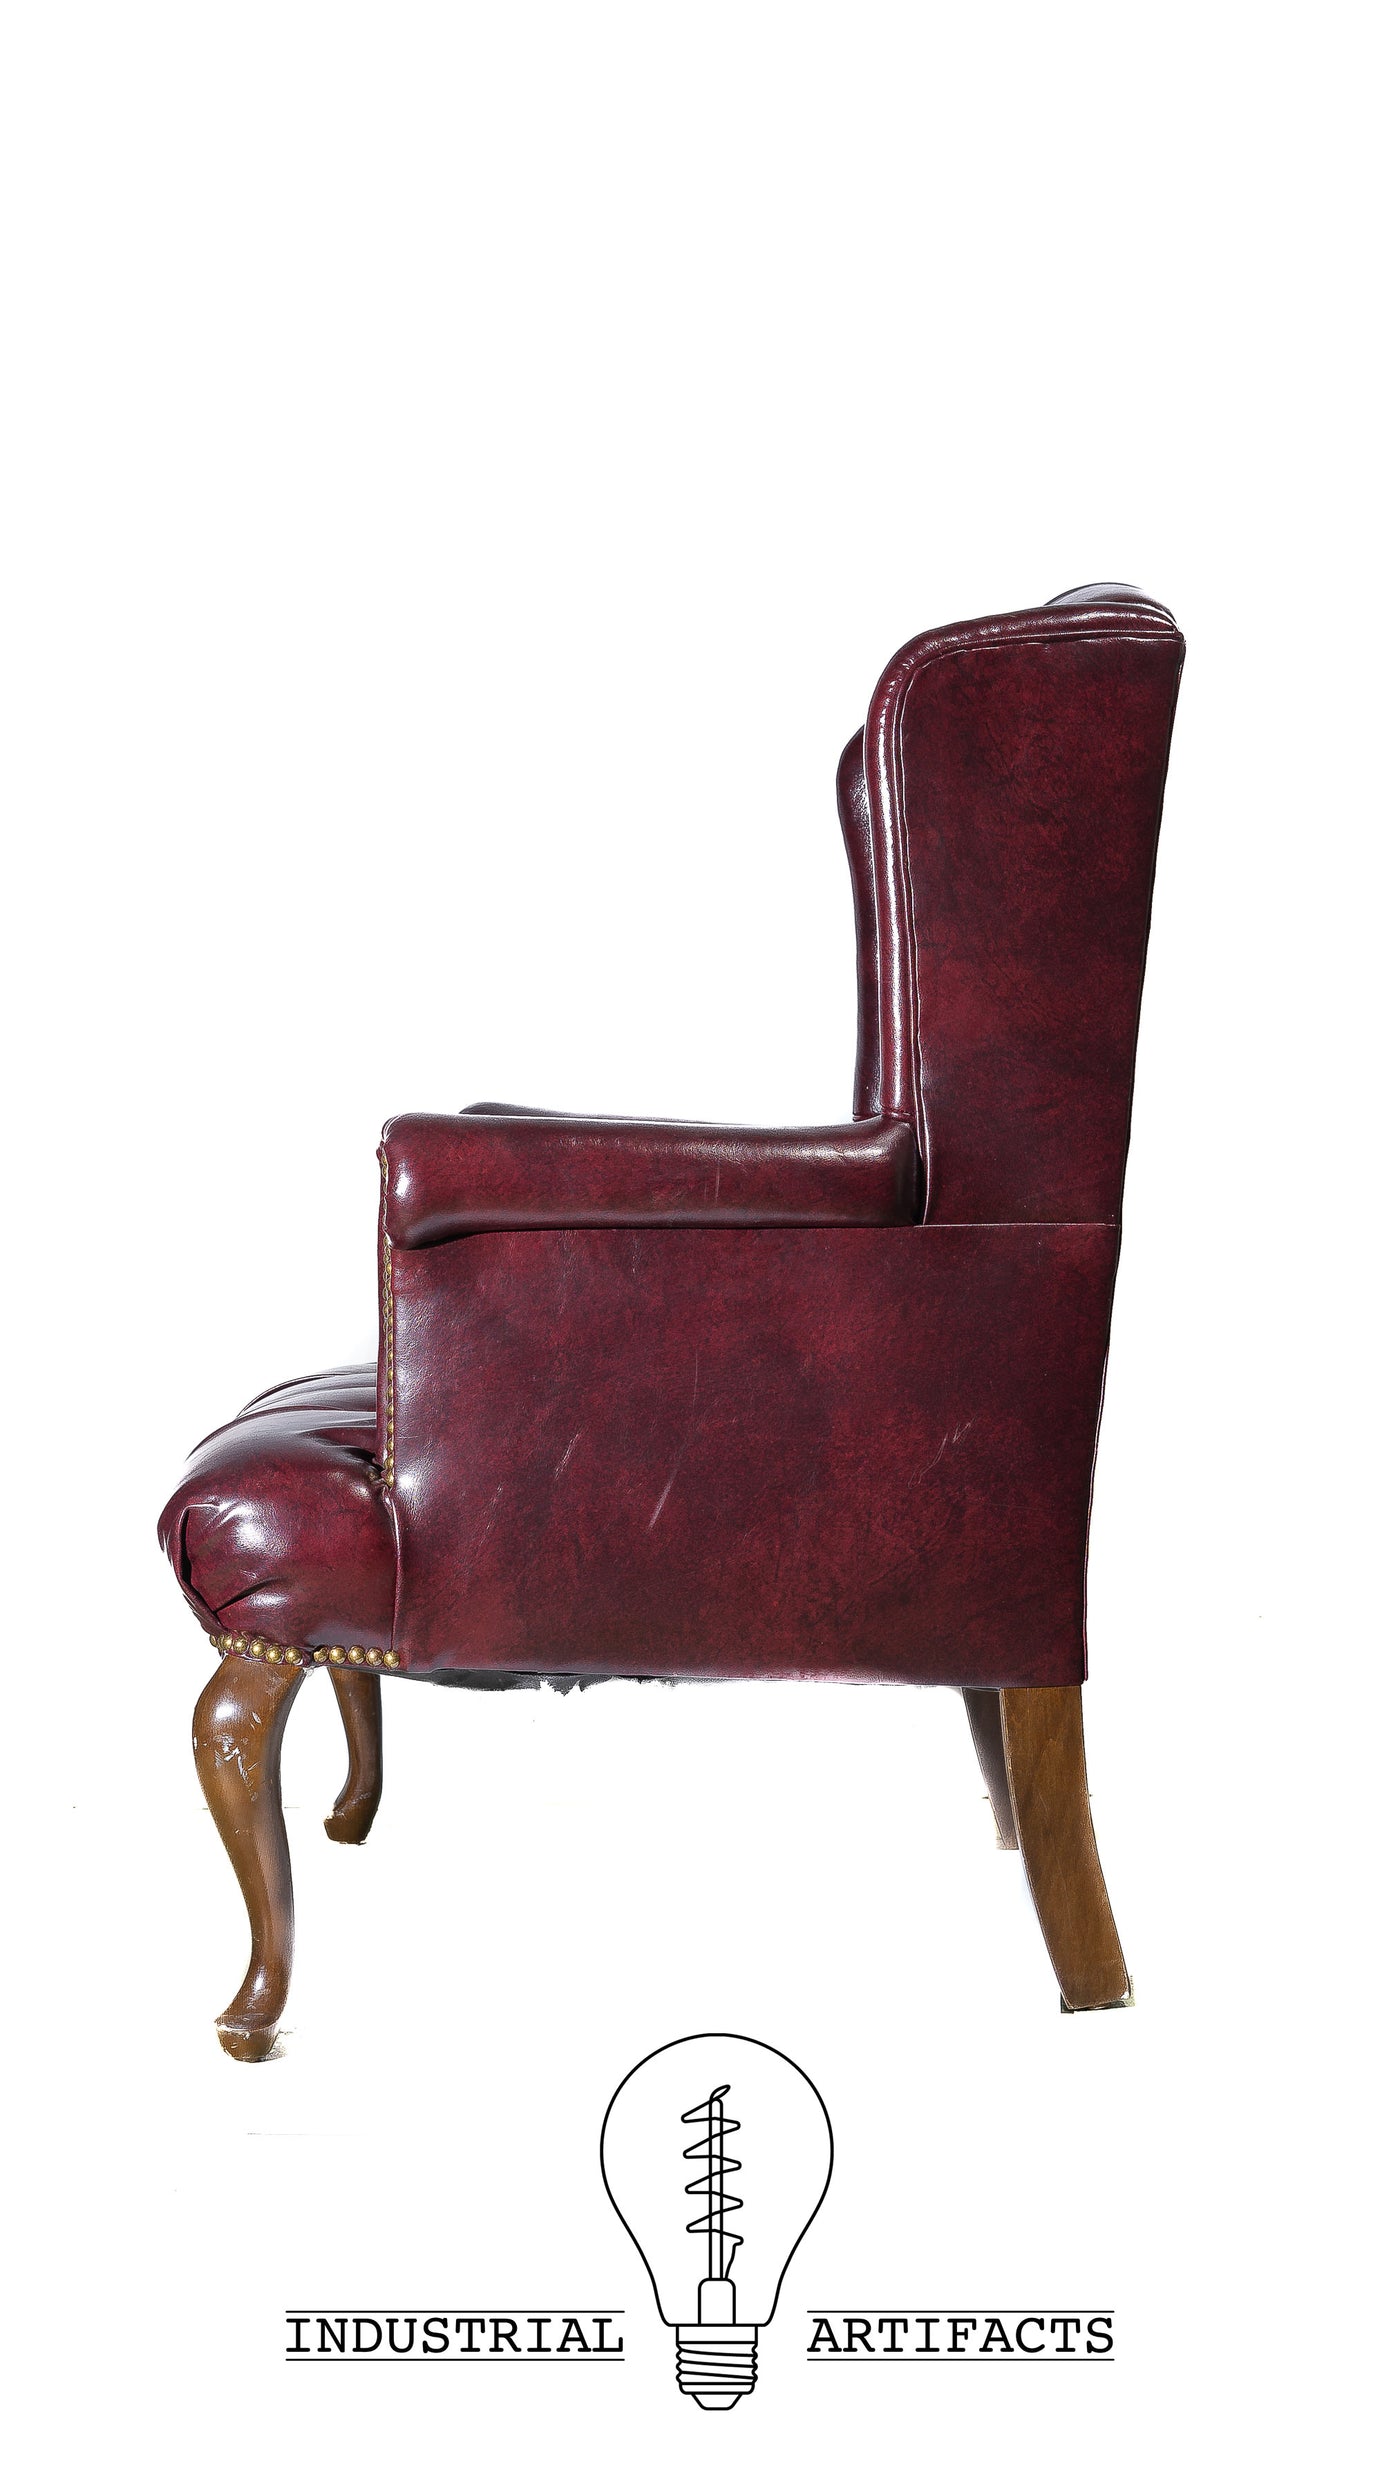 Vintage Tufted Wingback Chairs in Oxblood